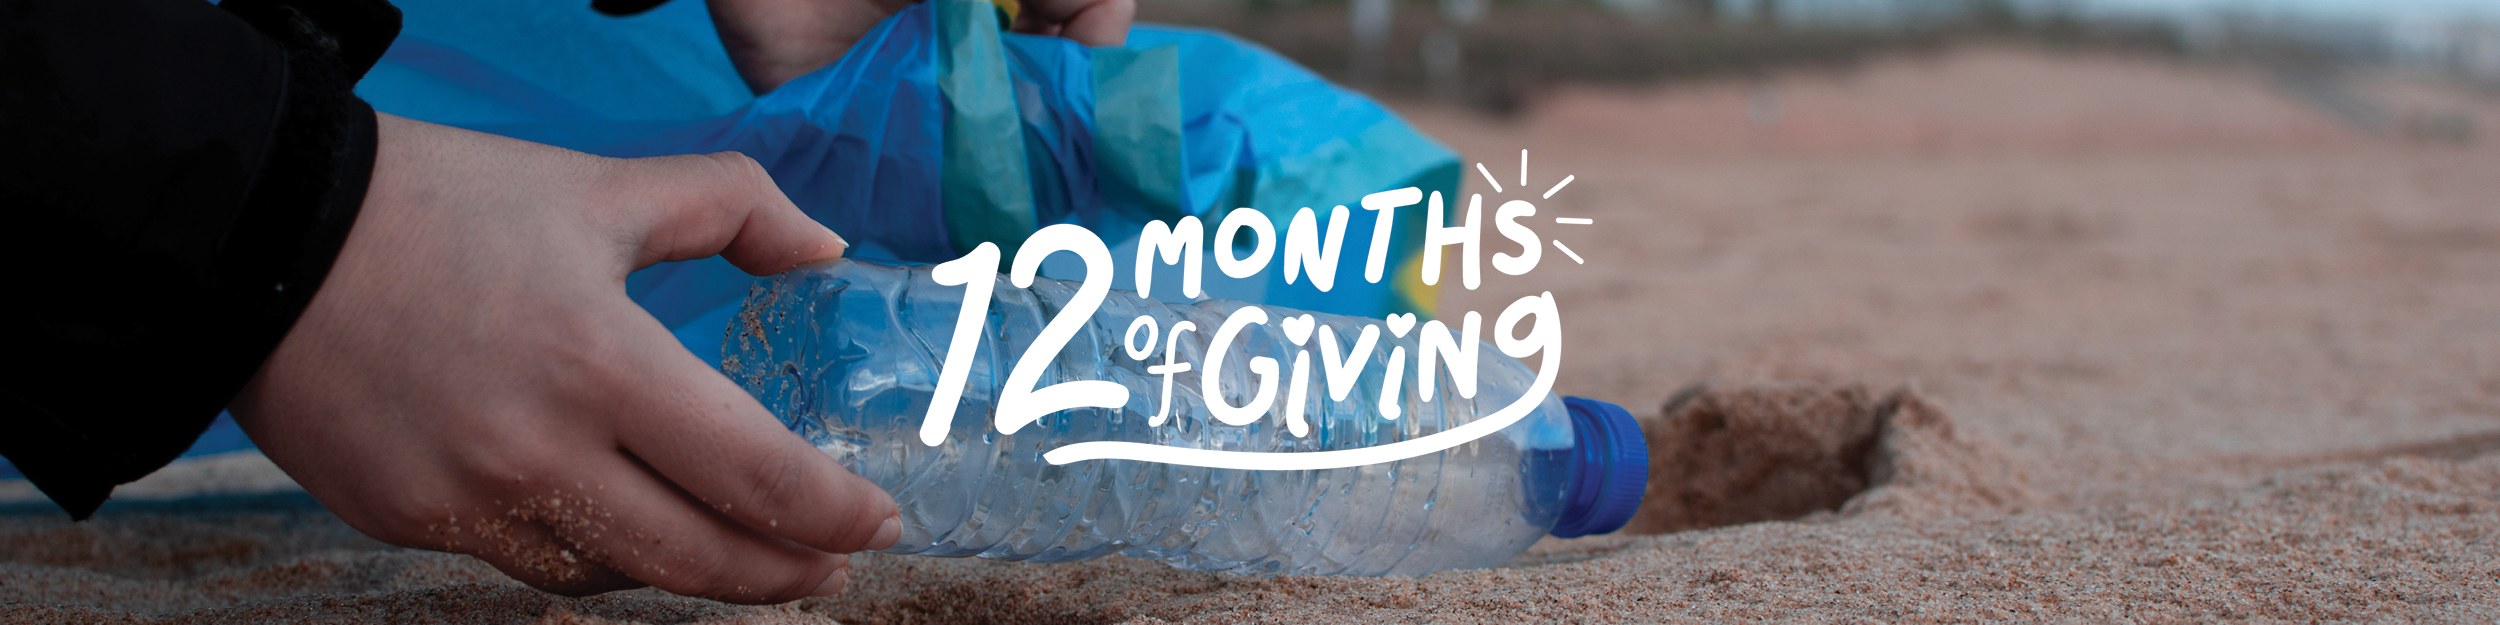 Senior Marketing Specialists 12 Months of Giving